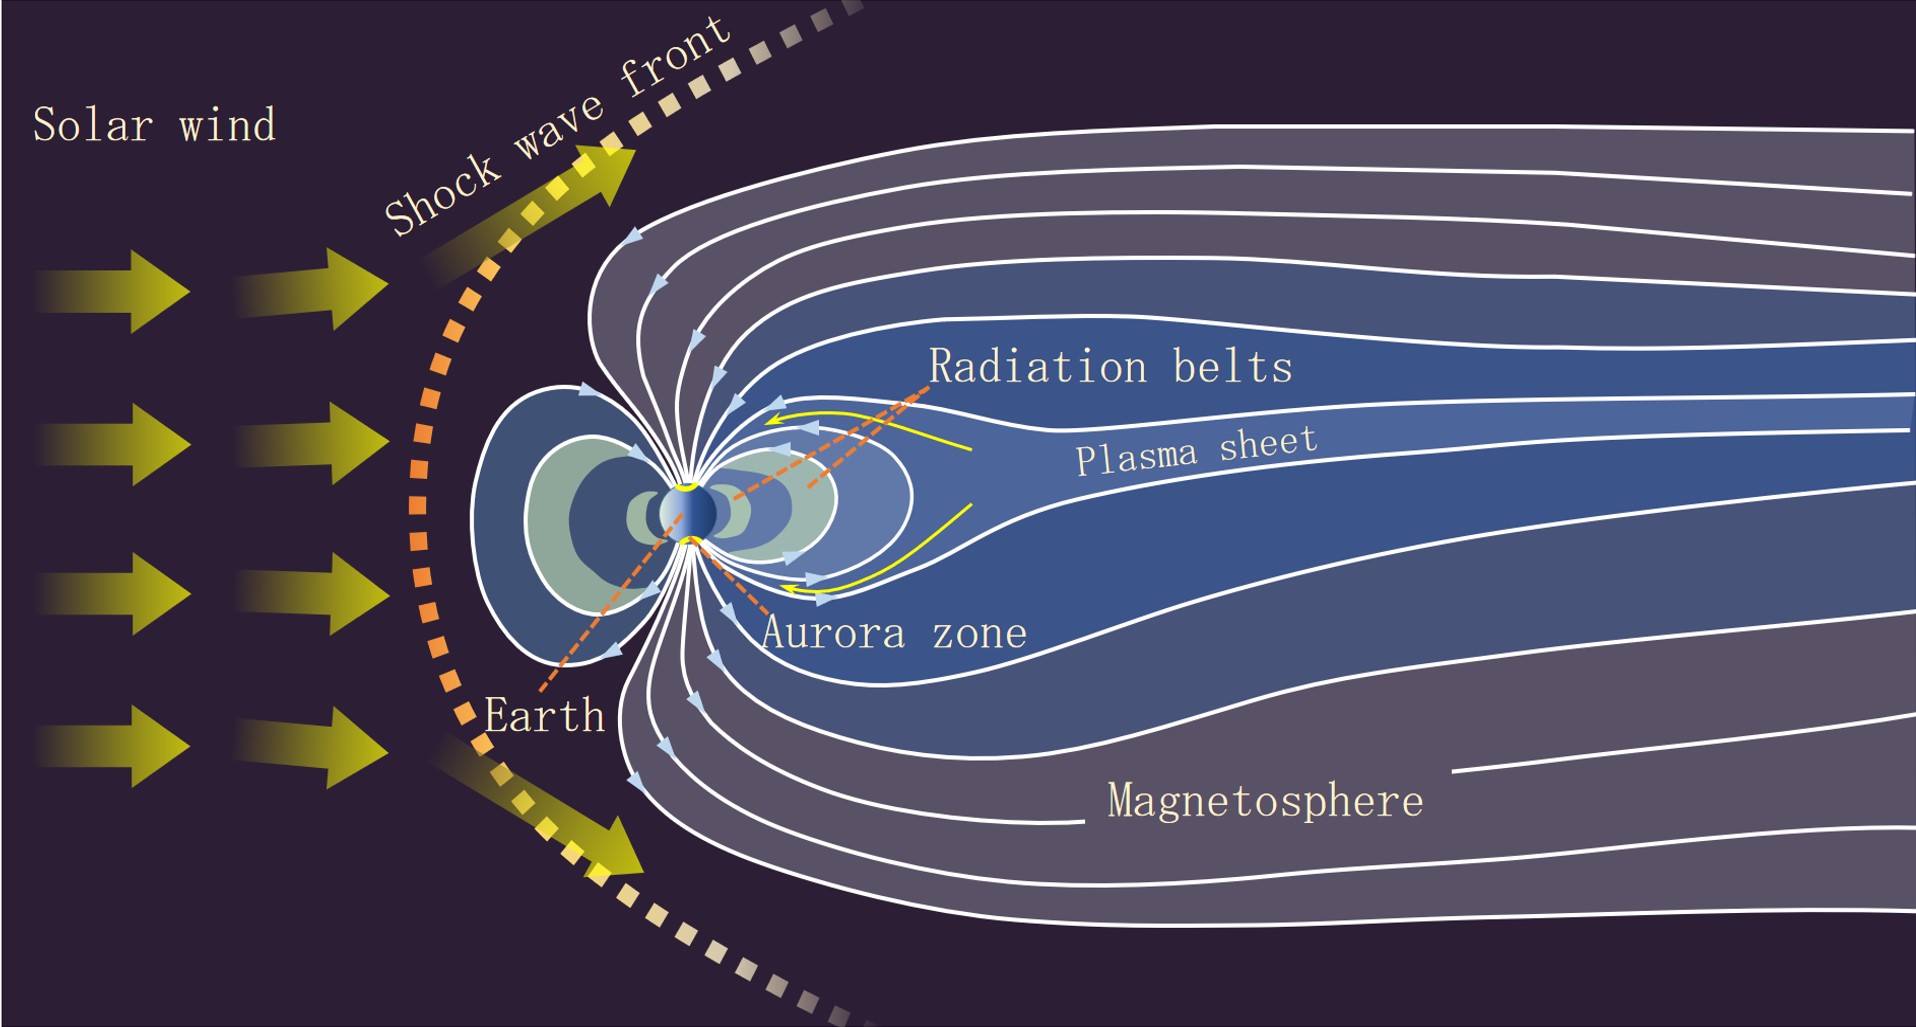 Earth magnetosphere